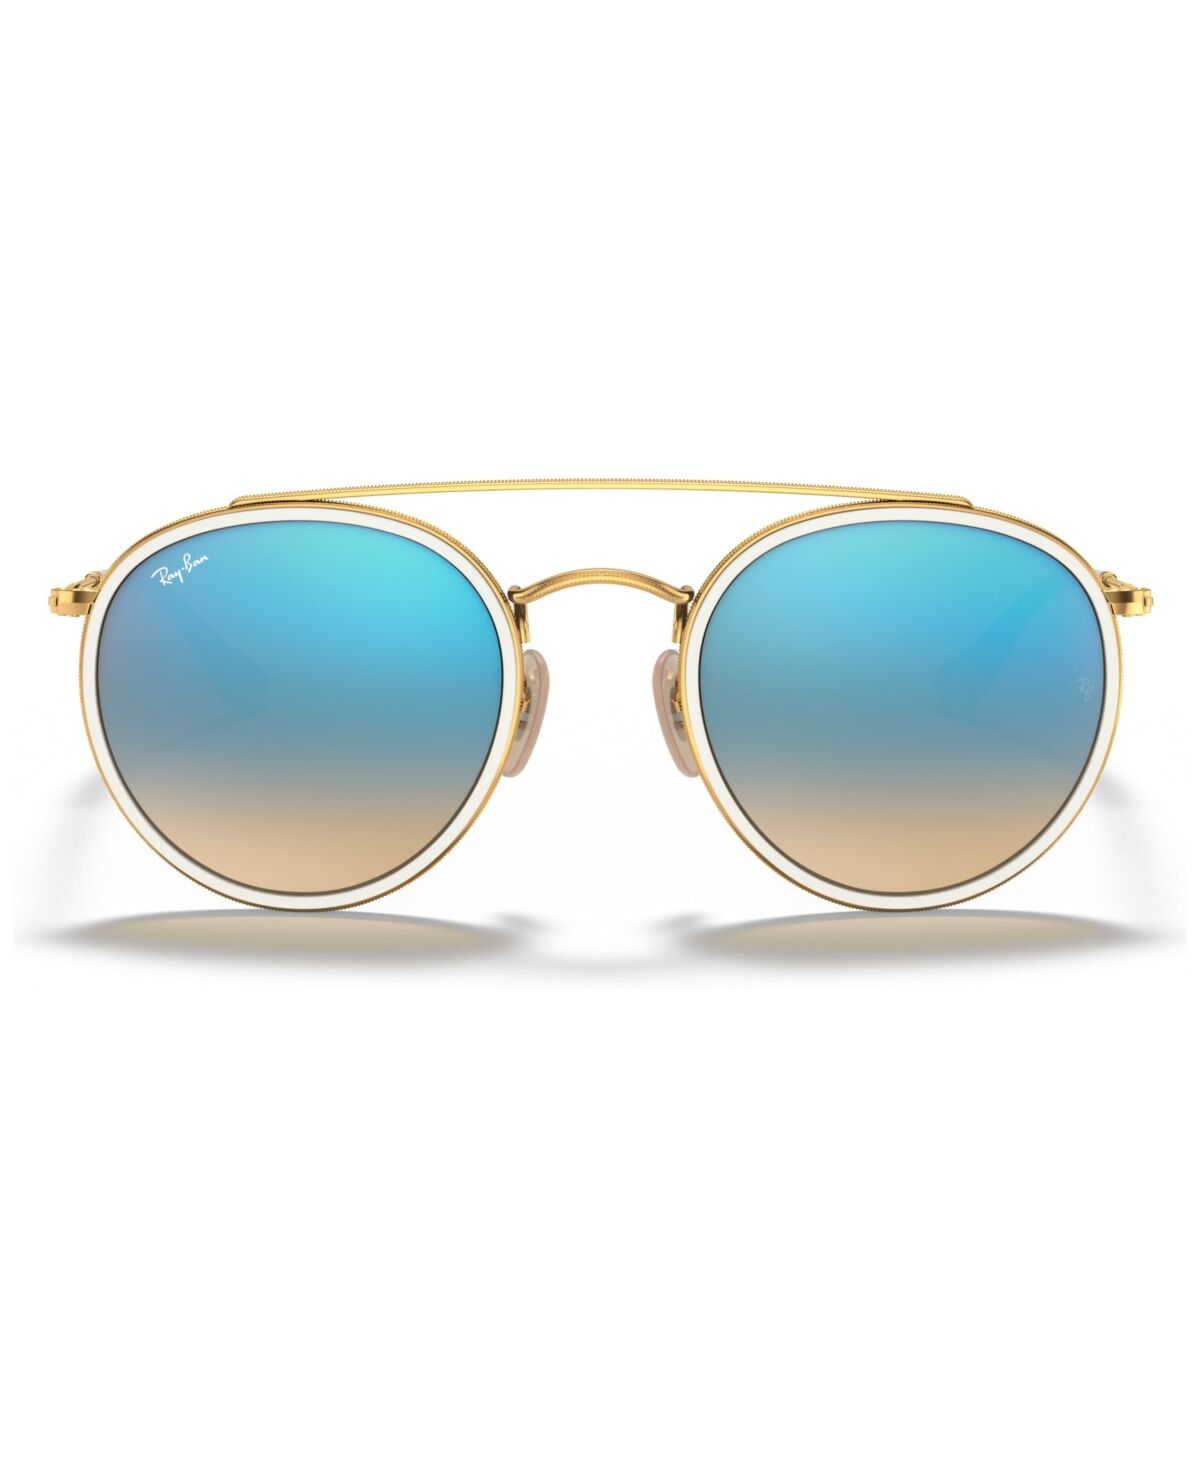 Ray-Ban Sunglasses, RB3647N Round Double Bridge - GOLD/BLUE